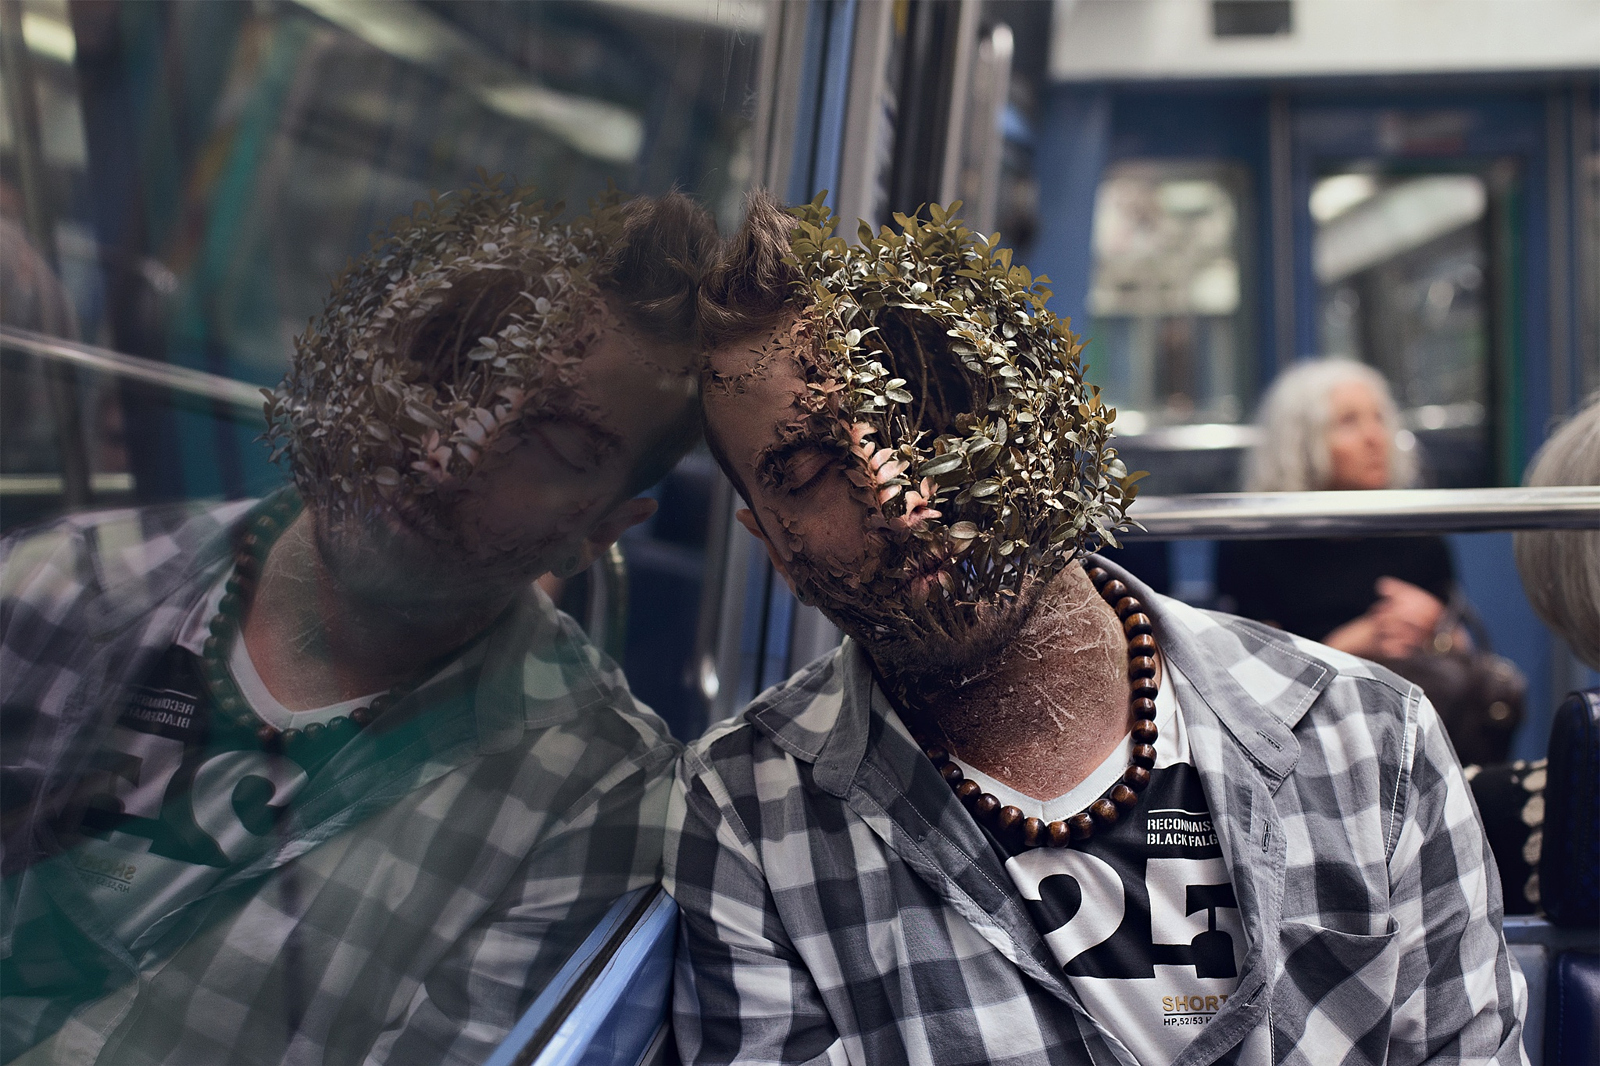 People Become Plants in These Intense Photo Manipulations